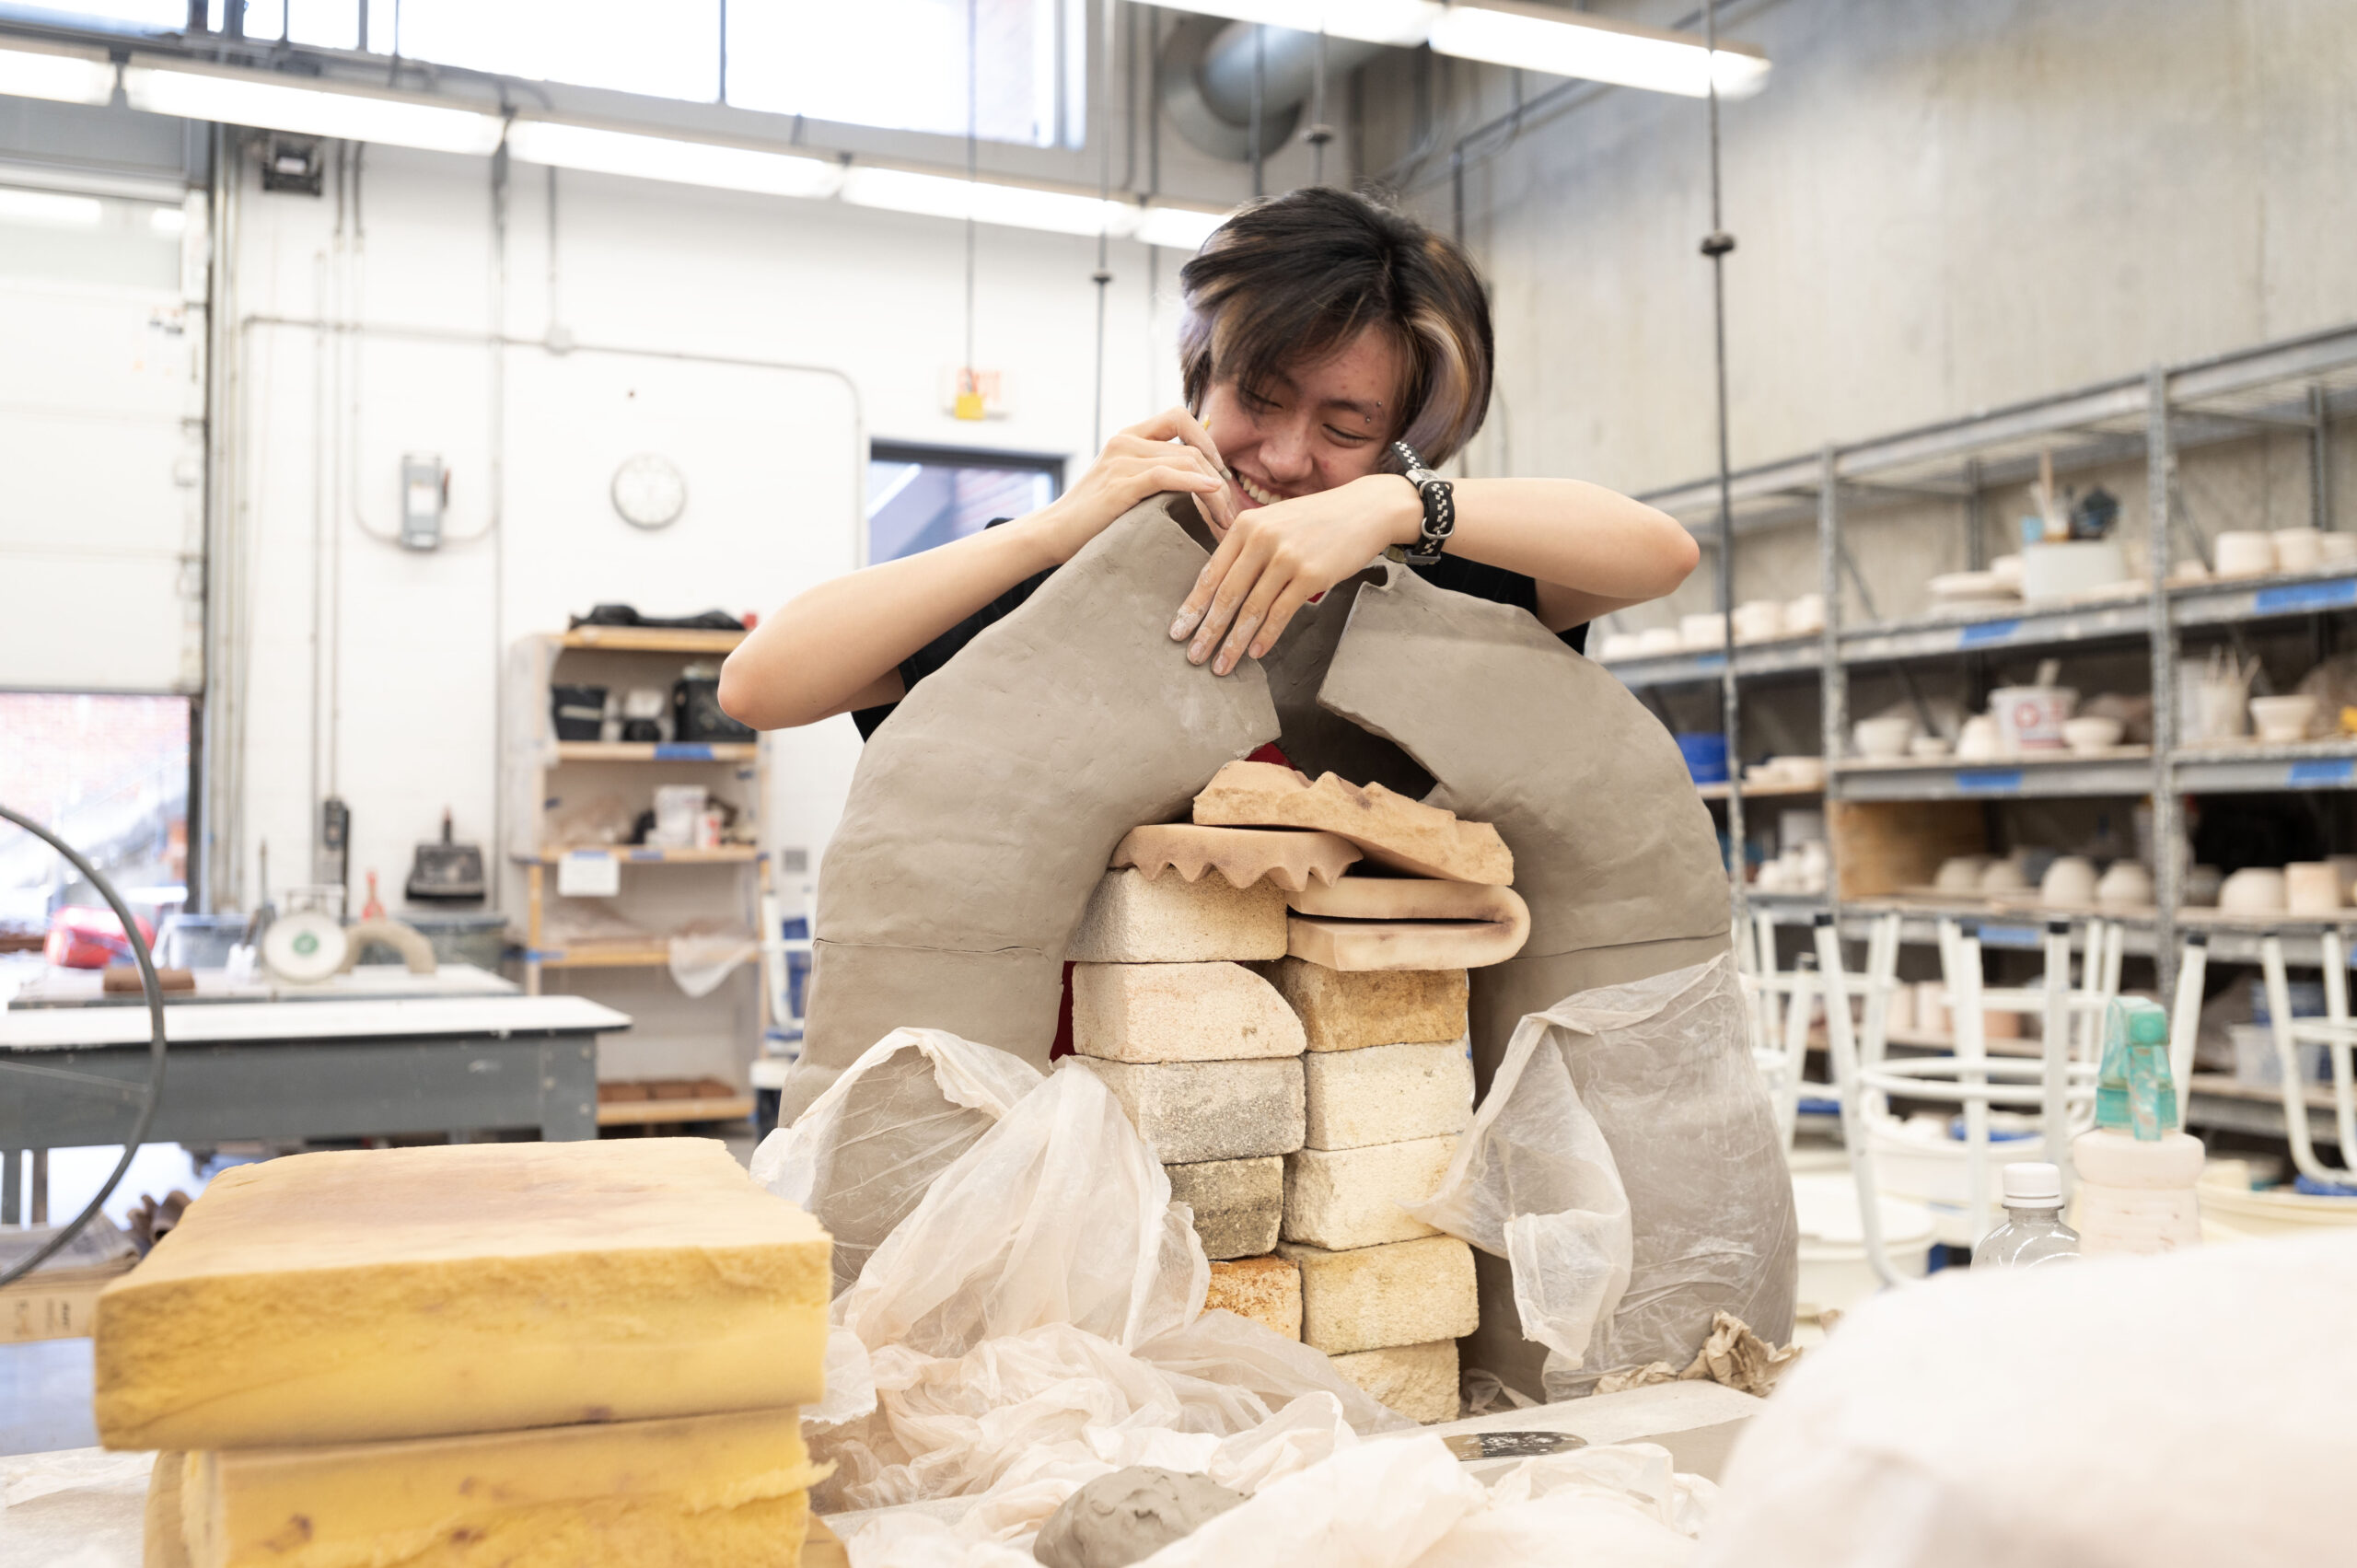 Art student works on a sculpture in a studio.